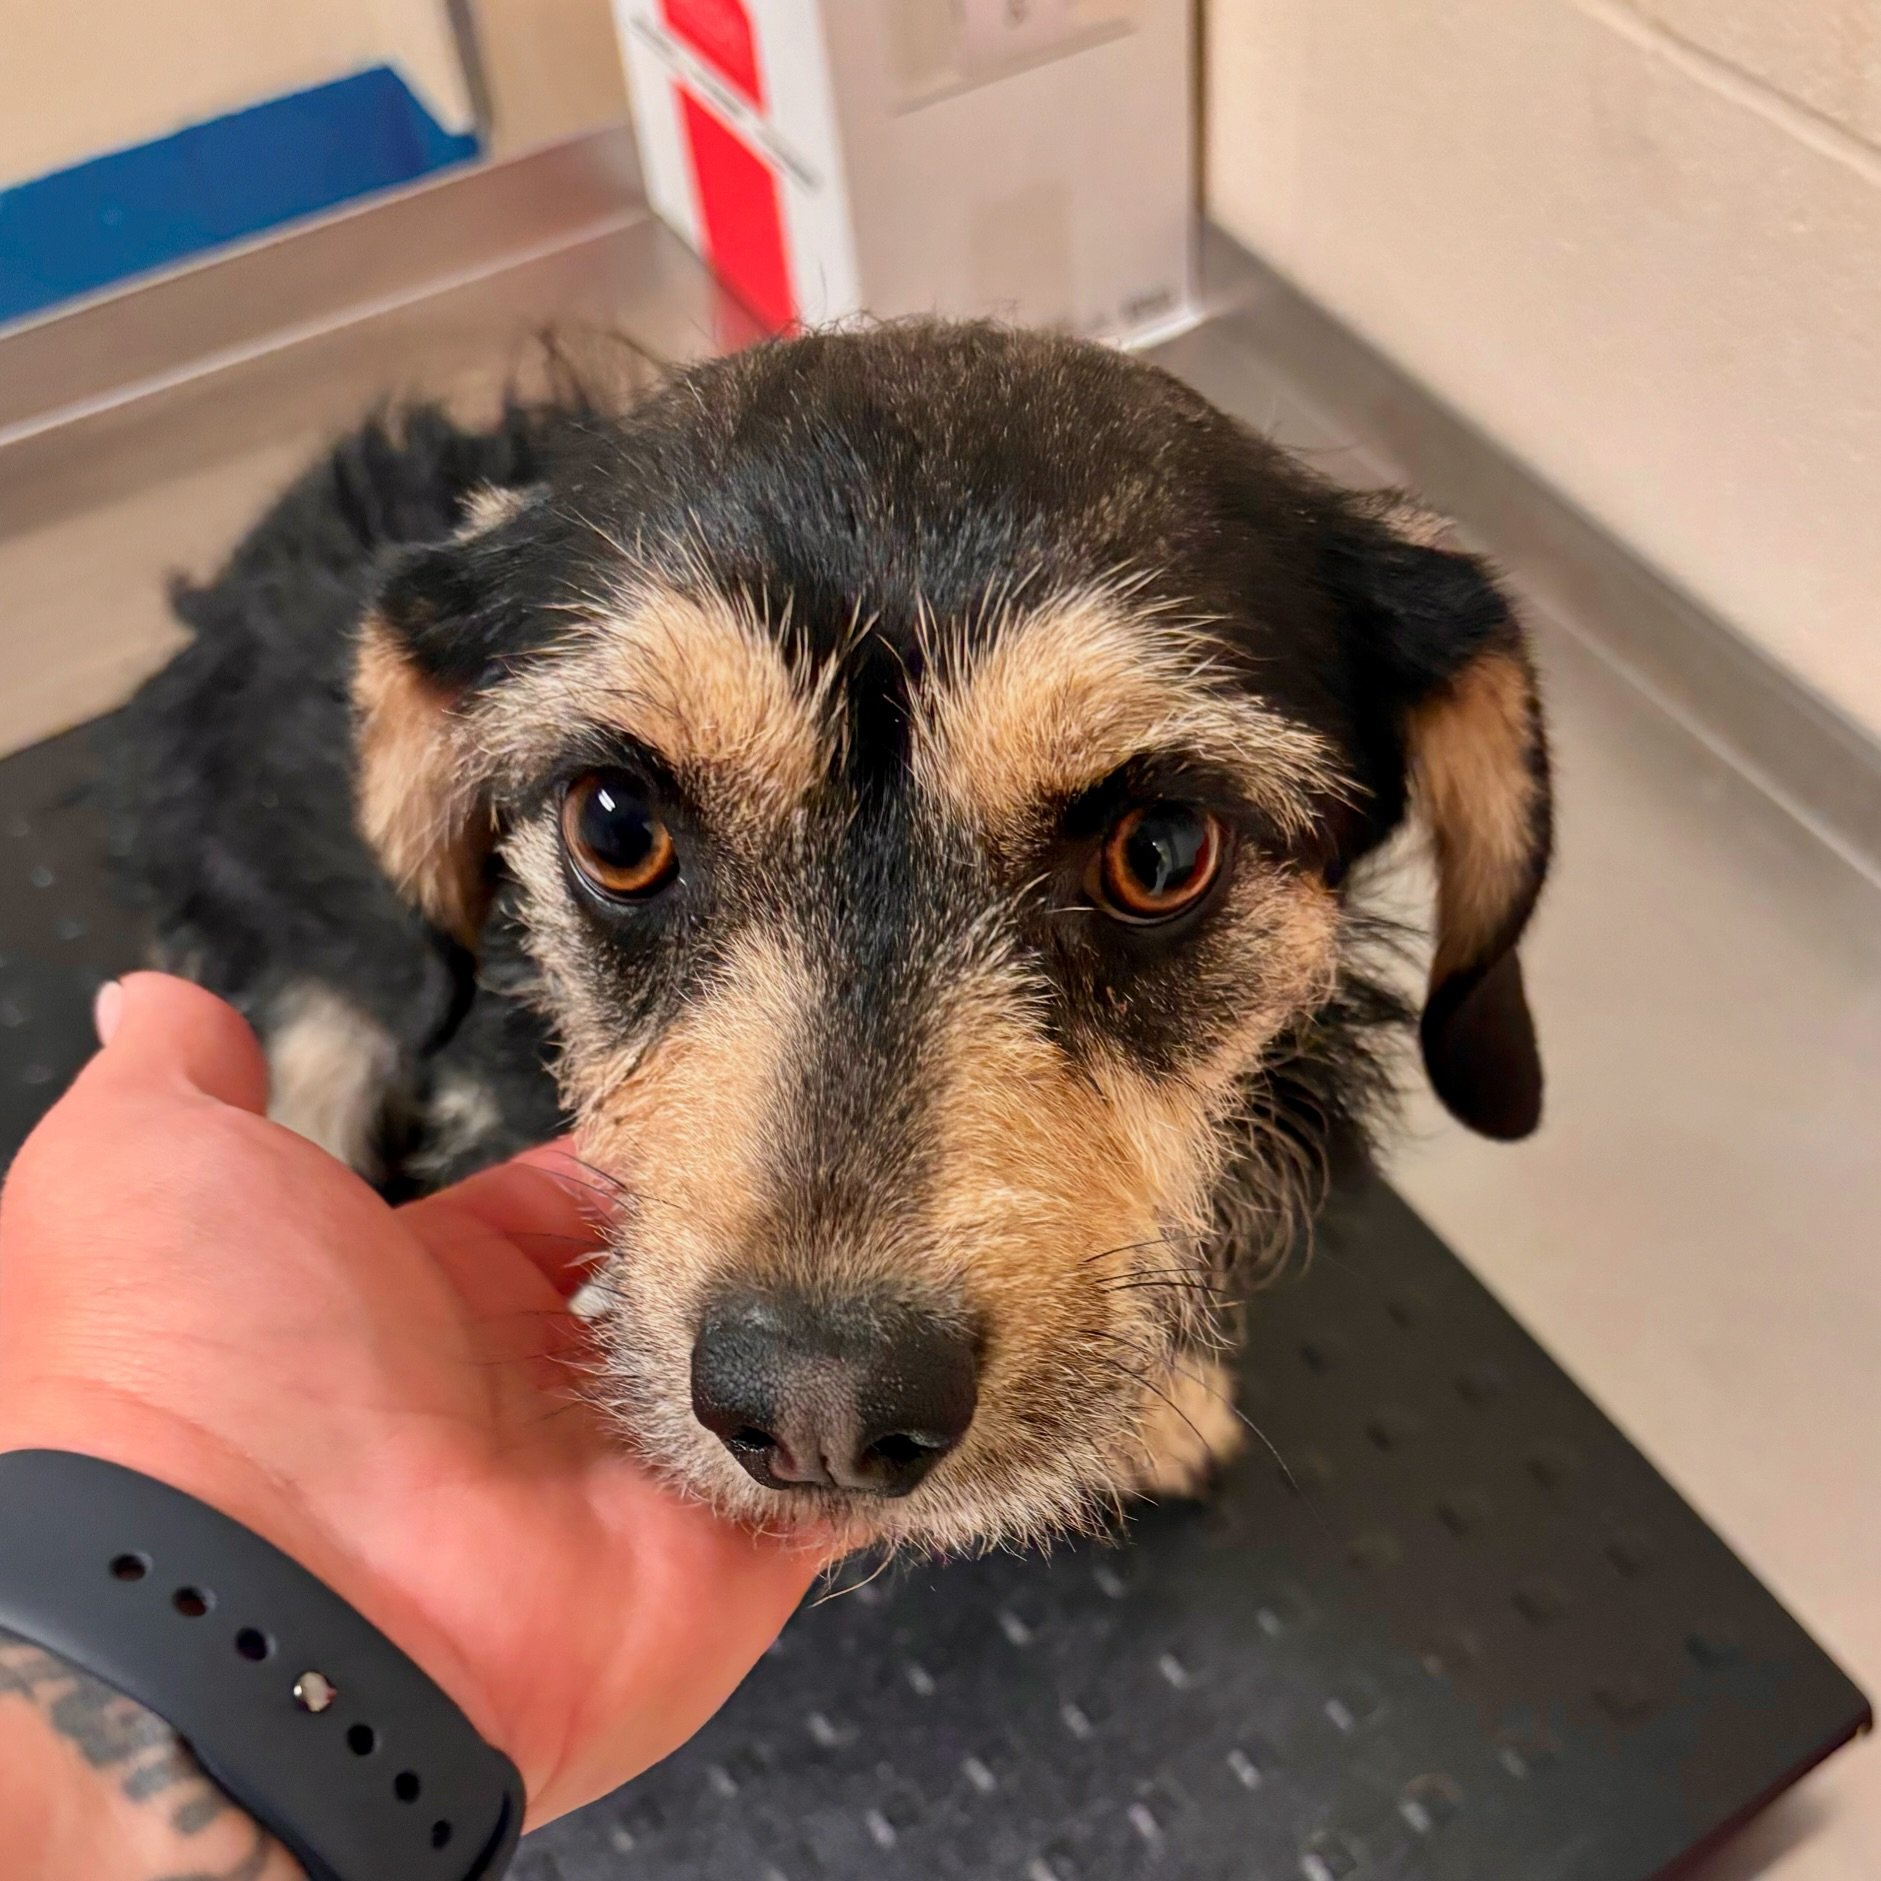 This shy boi is very distressed to find himself in a shelter after losing his guardian. Are you signed up to foster? We&rsquo;d love to get him in a home and feeling better. Got a resident dog? That&rsquo;s a plus! Reach out for our foster survey and